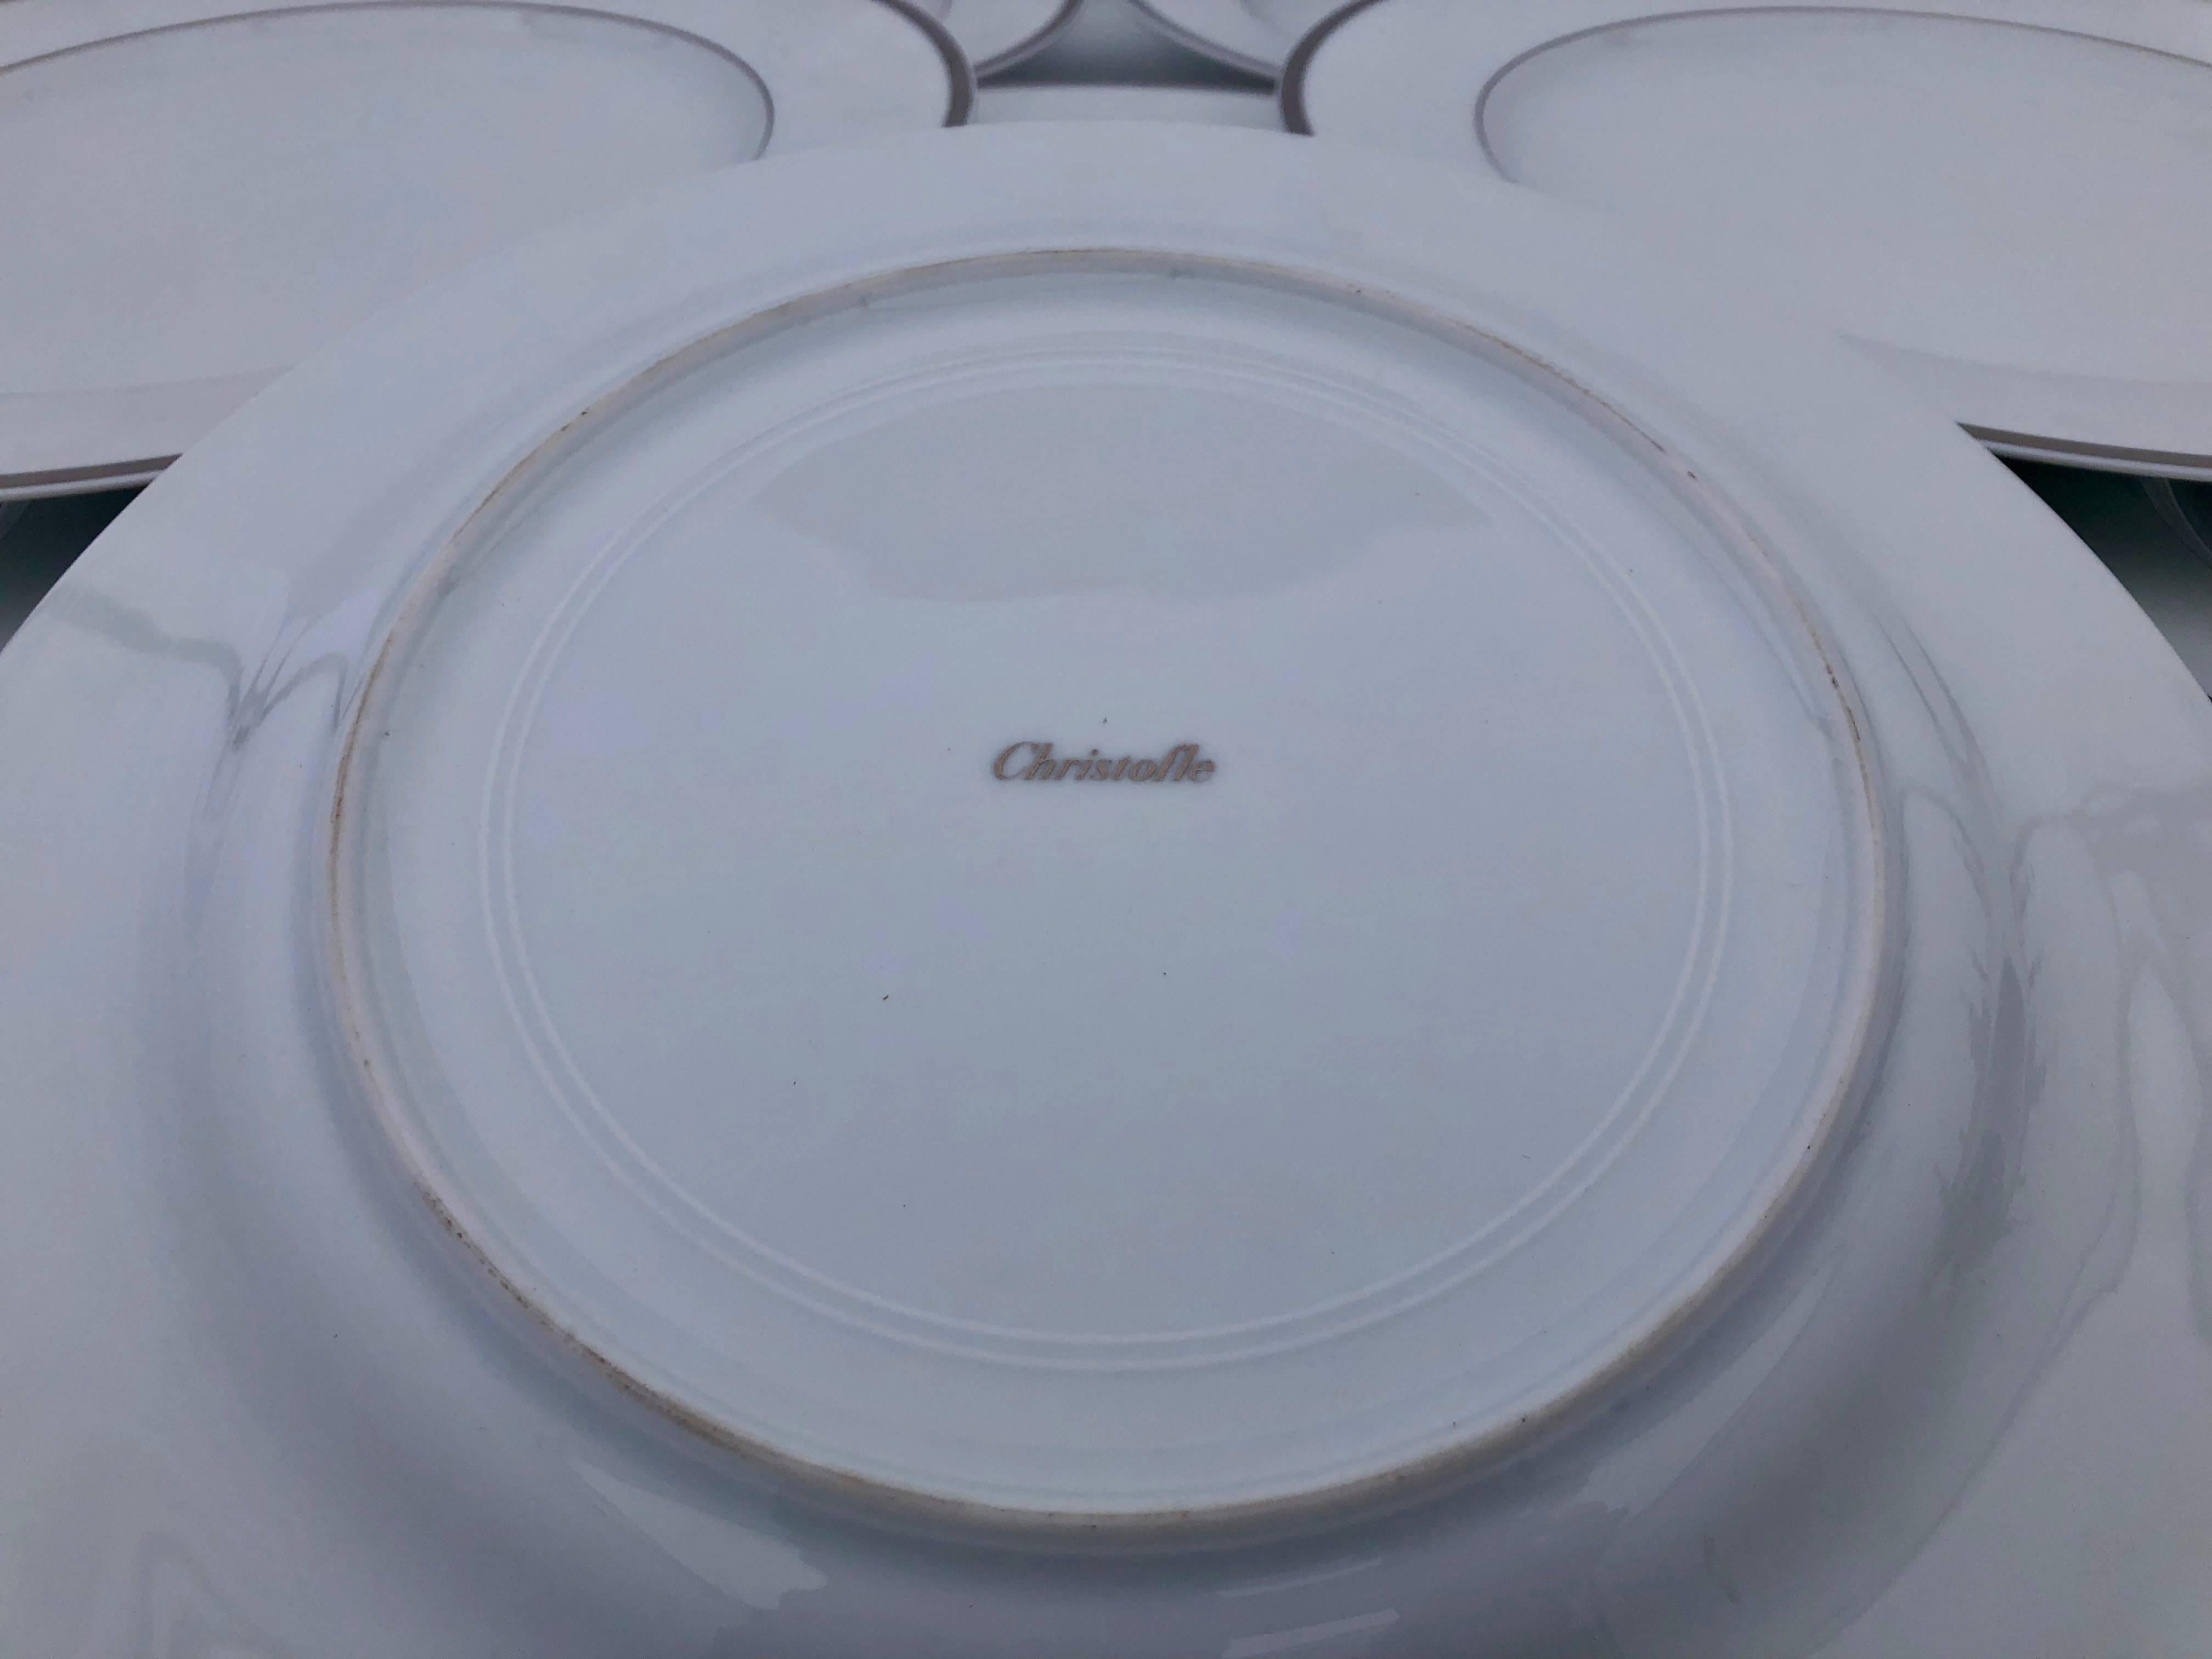 Christofle Porcelain Large Presentation Plates with Silver Banding, Set of 40 In Excellent Condition For Sale In Petaluma, CA